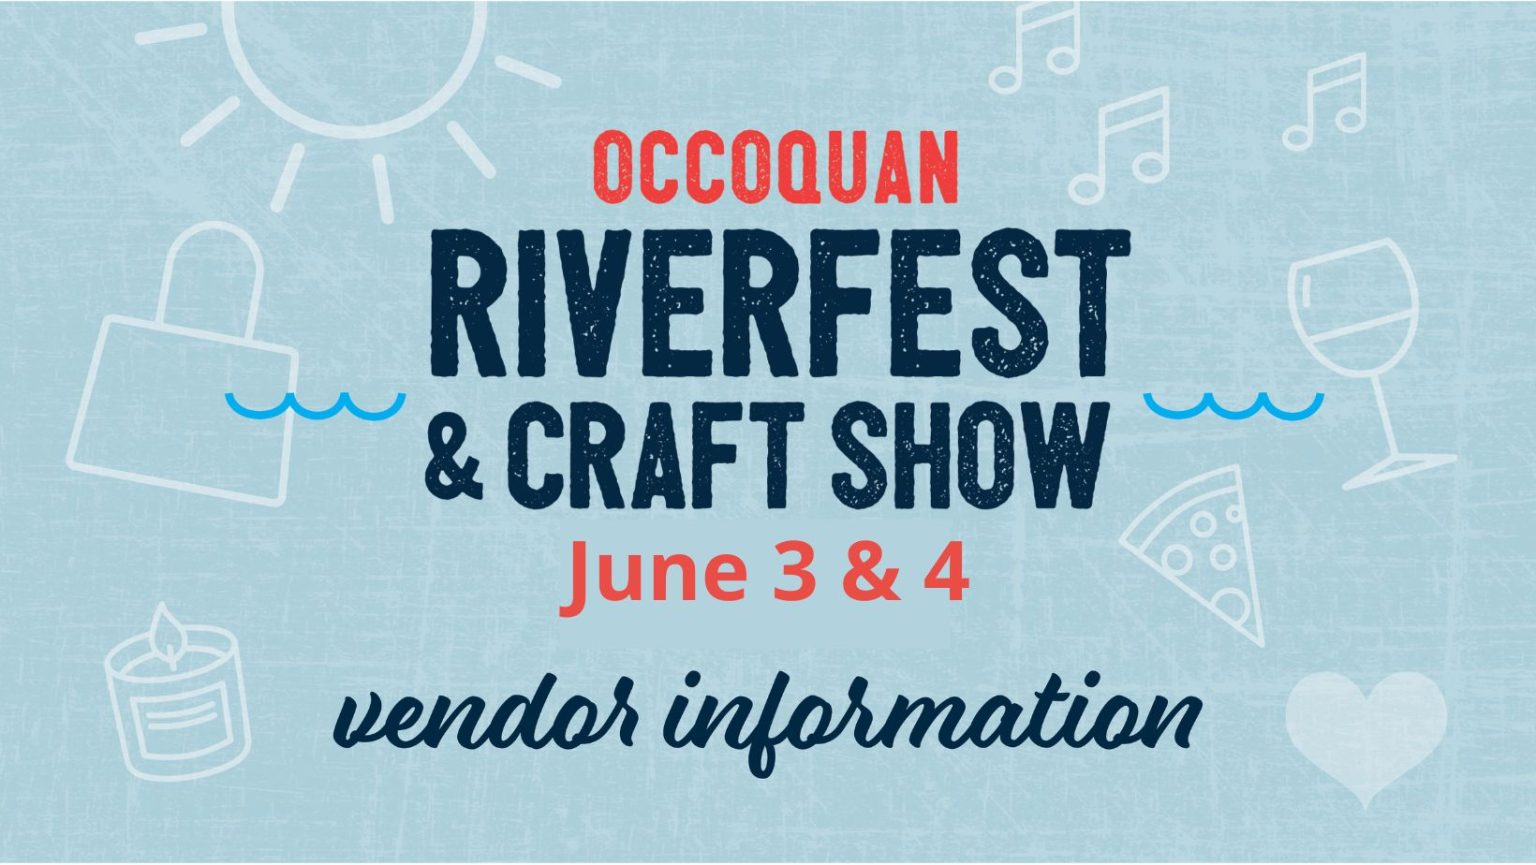 Vendor Information The Town of Occoquan